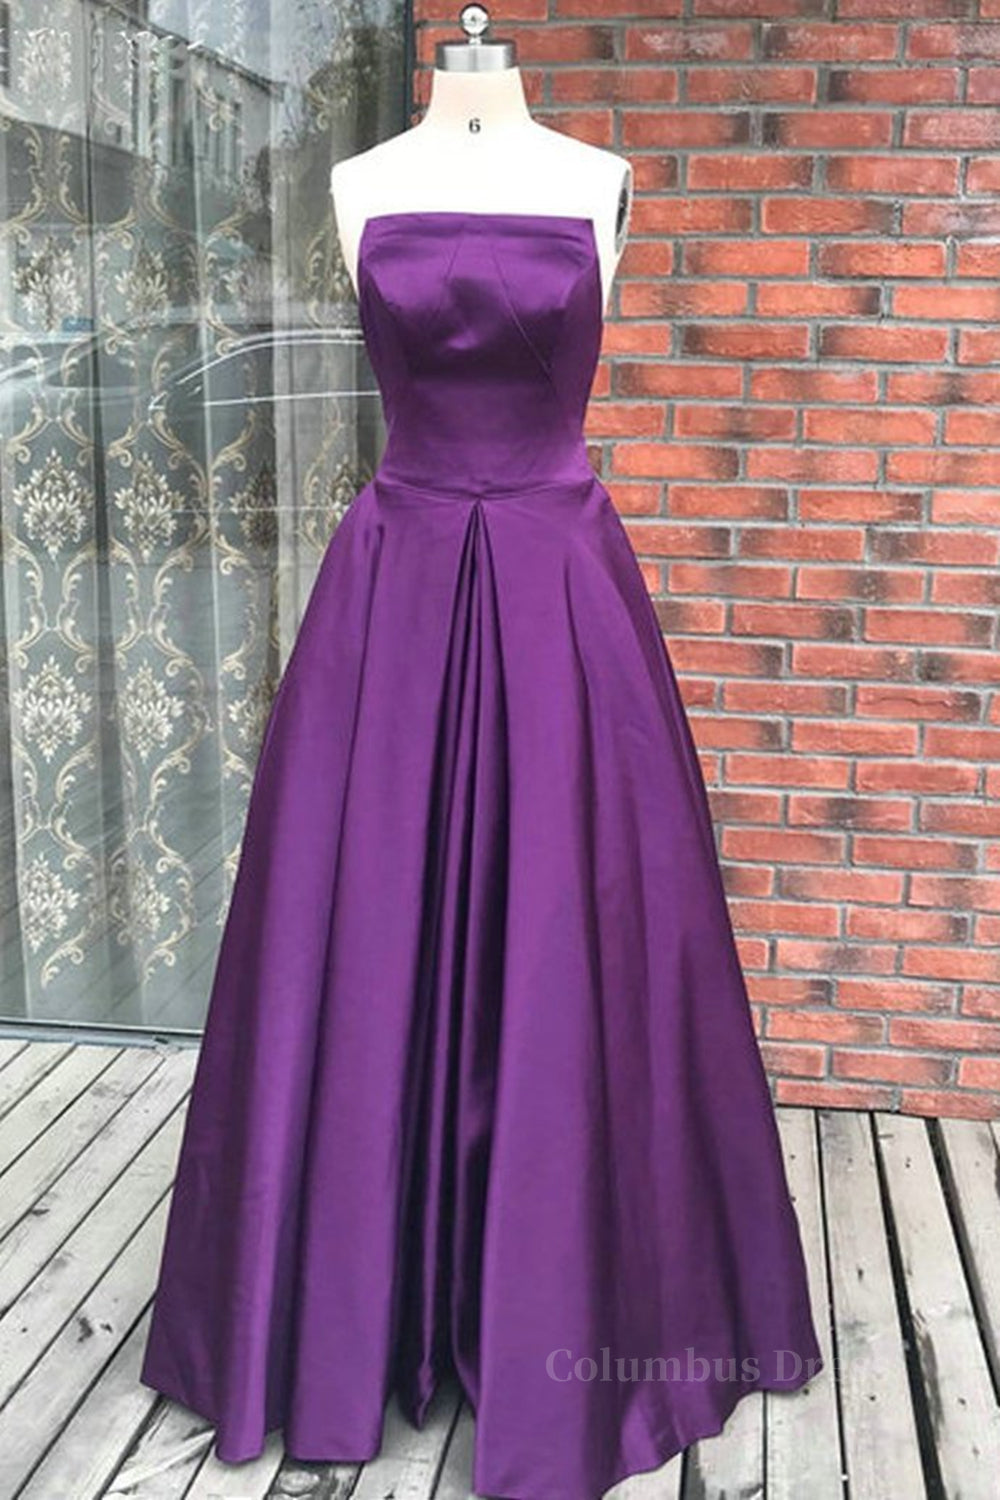 Simple Backless Purple Satin Long Corset Prom Dresses, Backless Purple Corset Formal Dresses, Purple Evening Dresses outfit, Formal Dresses With Sleeves